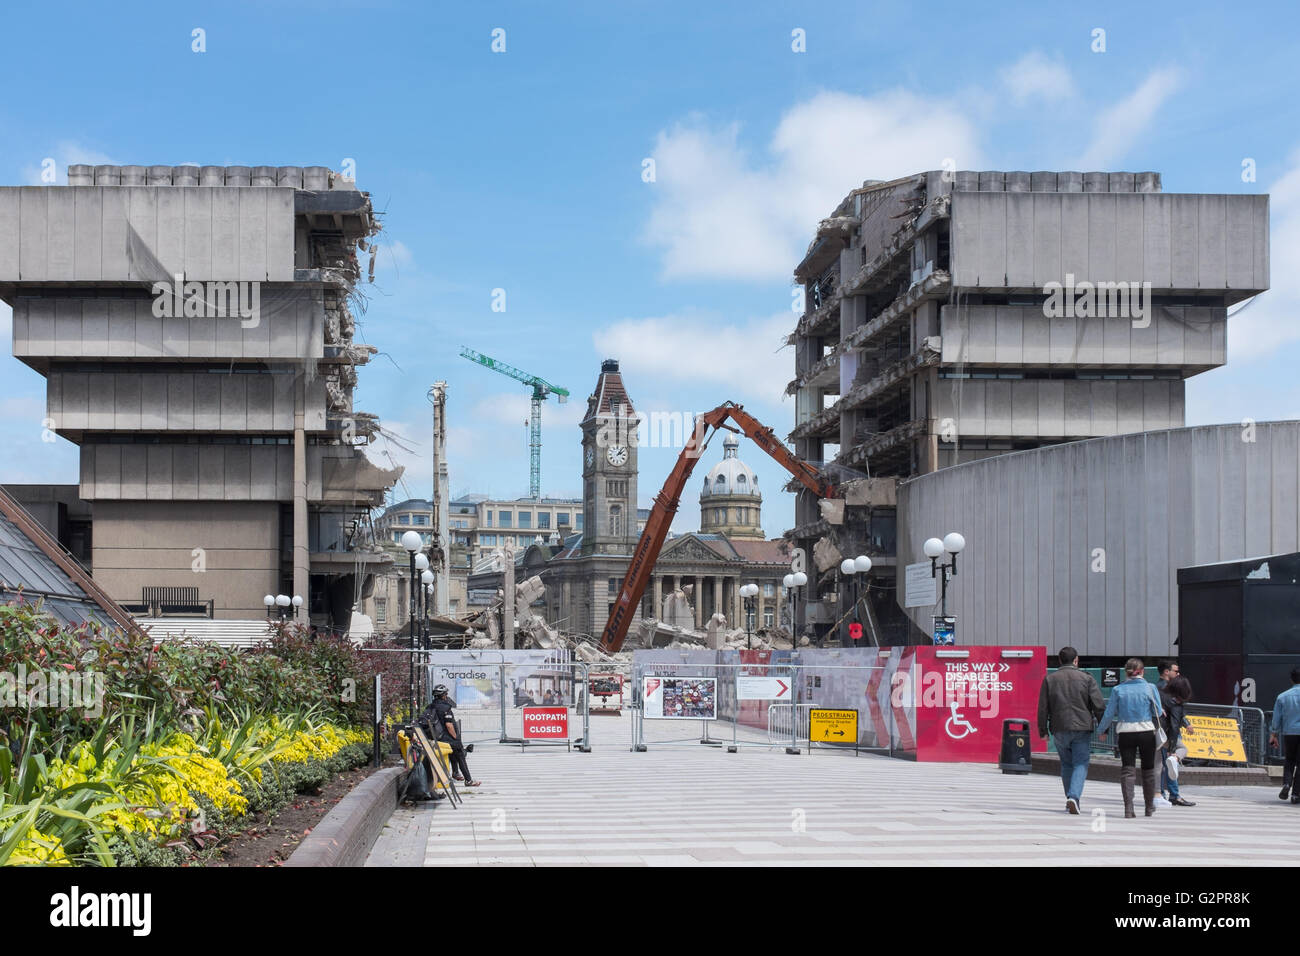 Demolition of the old Birmingham Central Library continues giving a